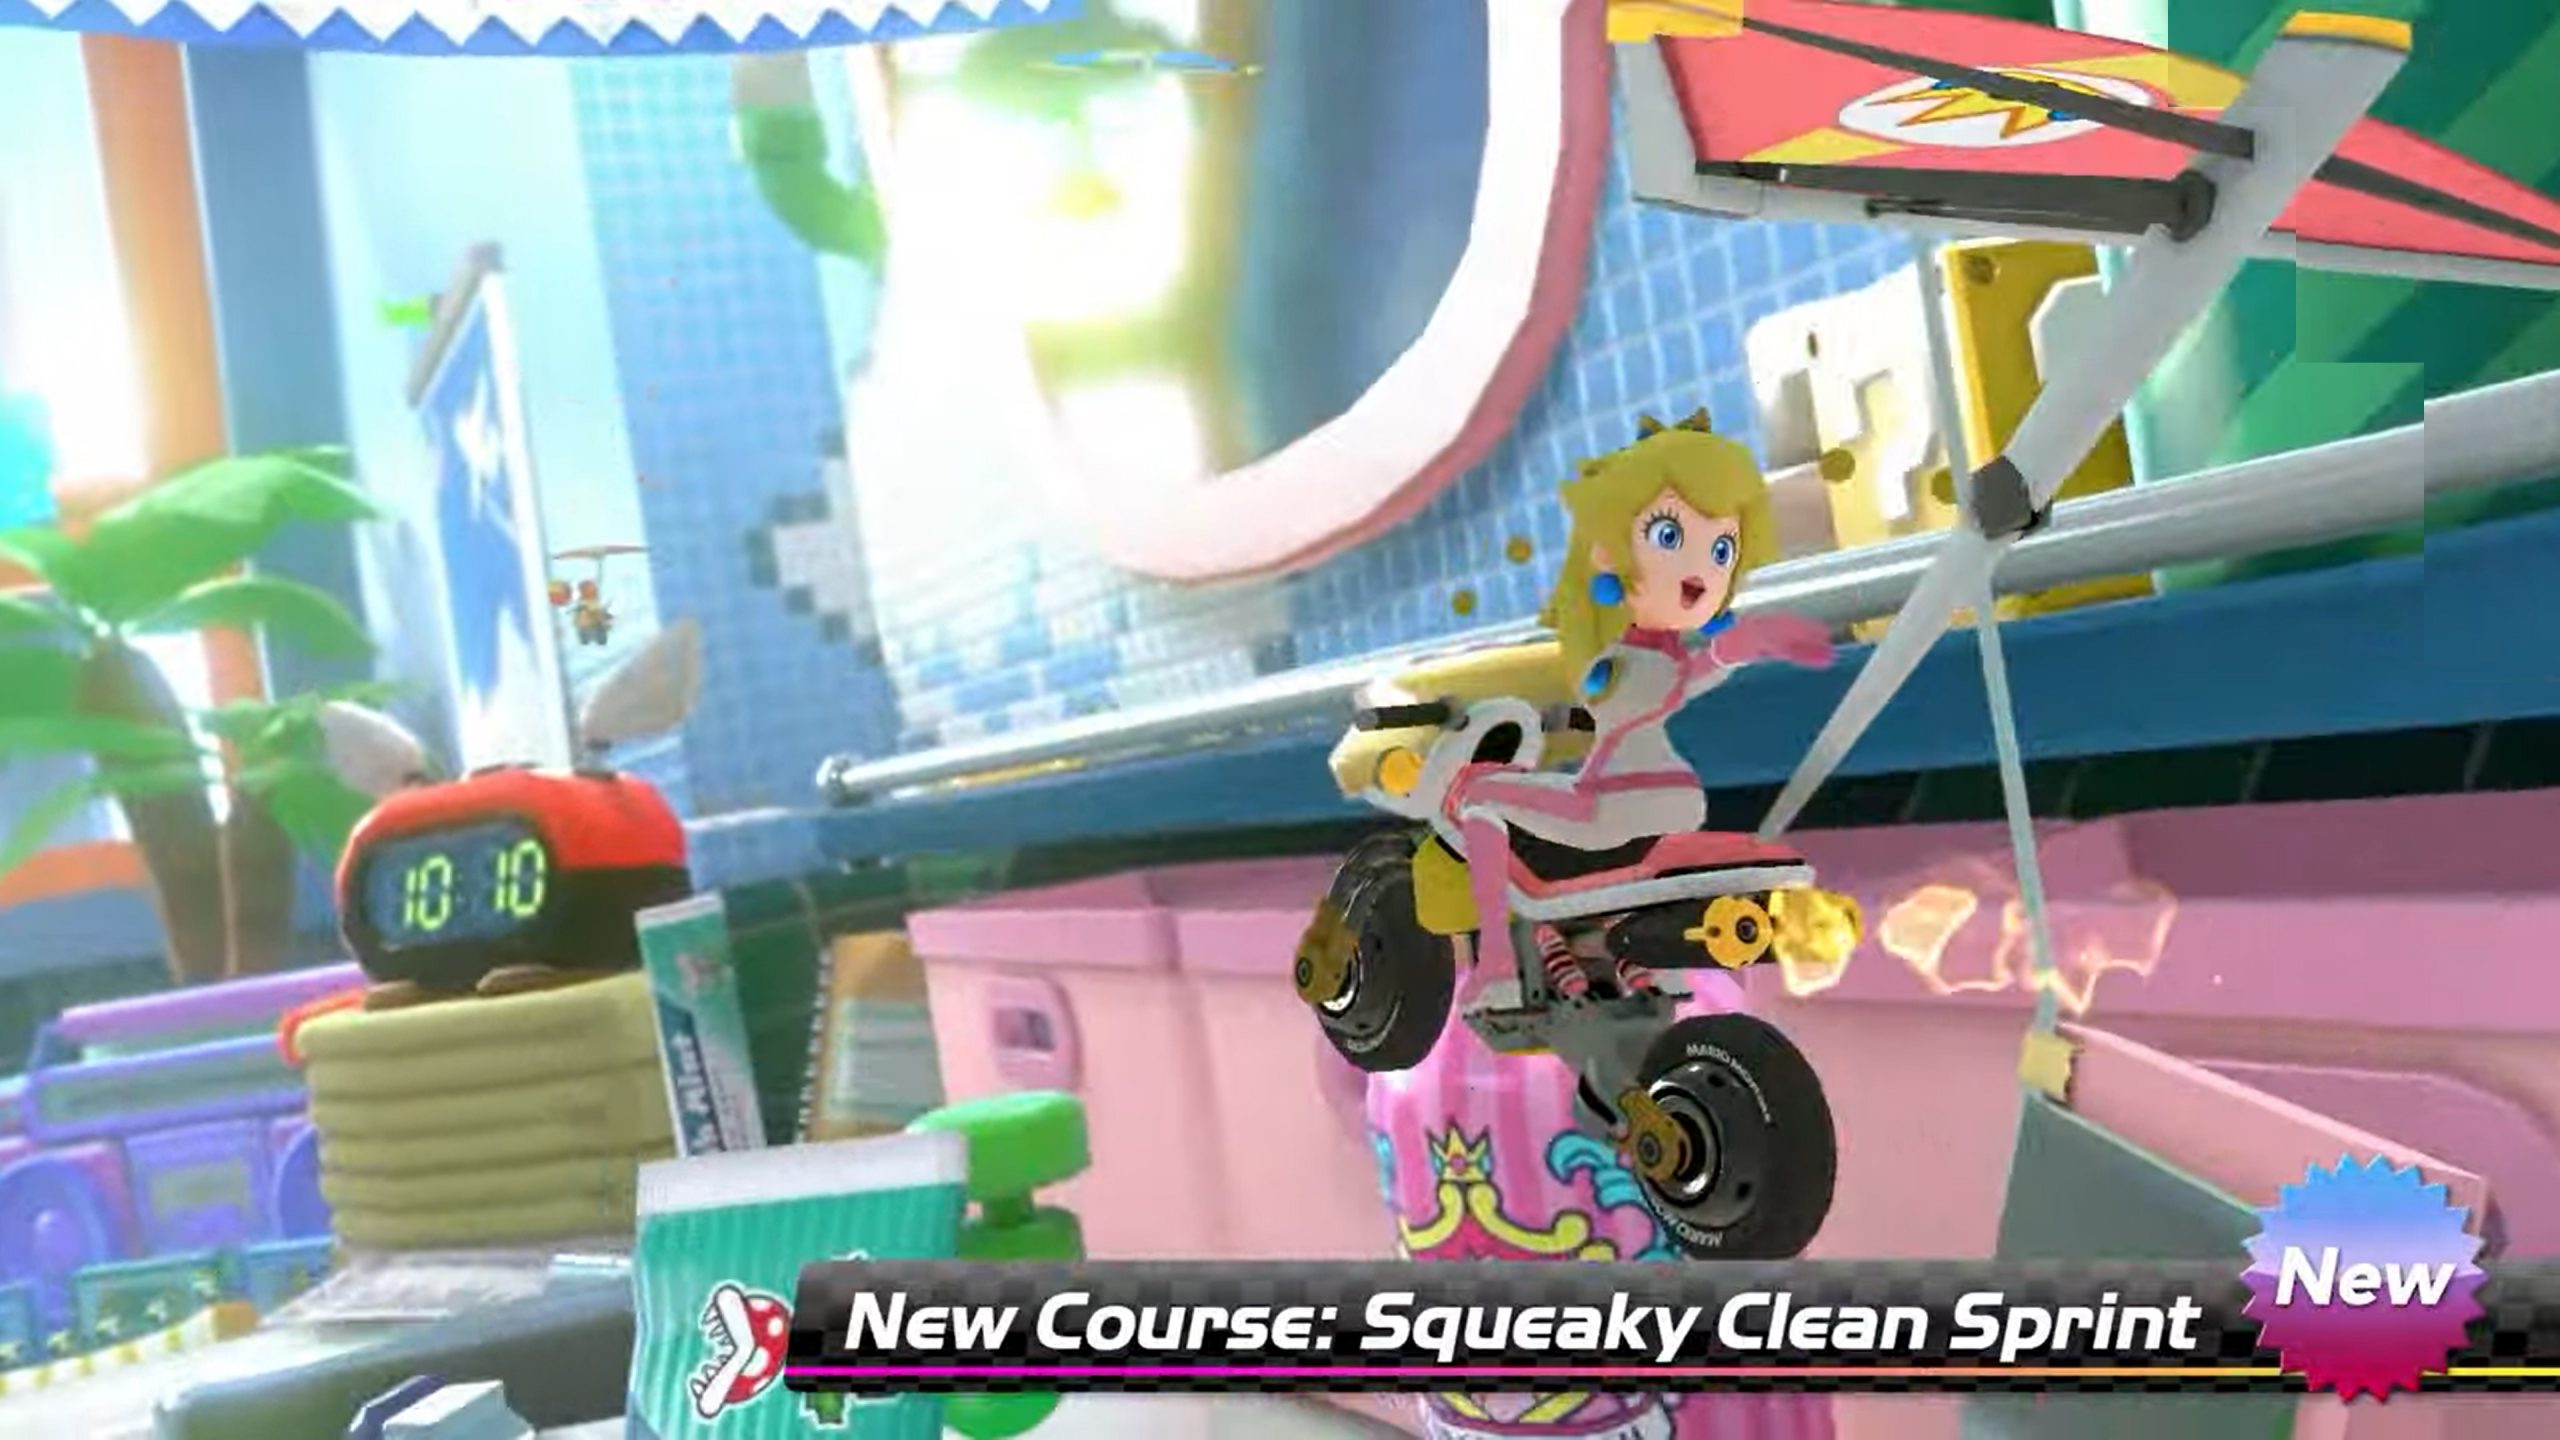 Mario Kart 8 Deluxe Booster Course Pass Wave 5 details revealed